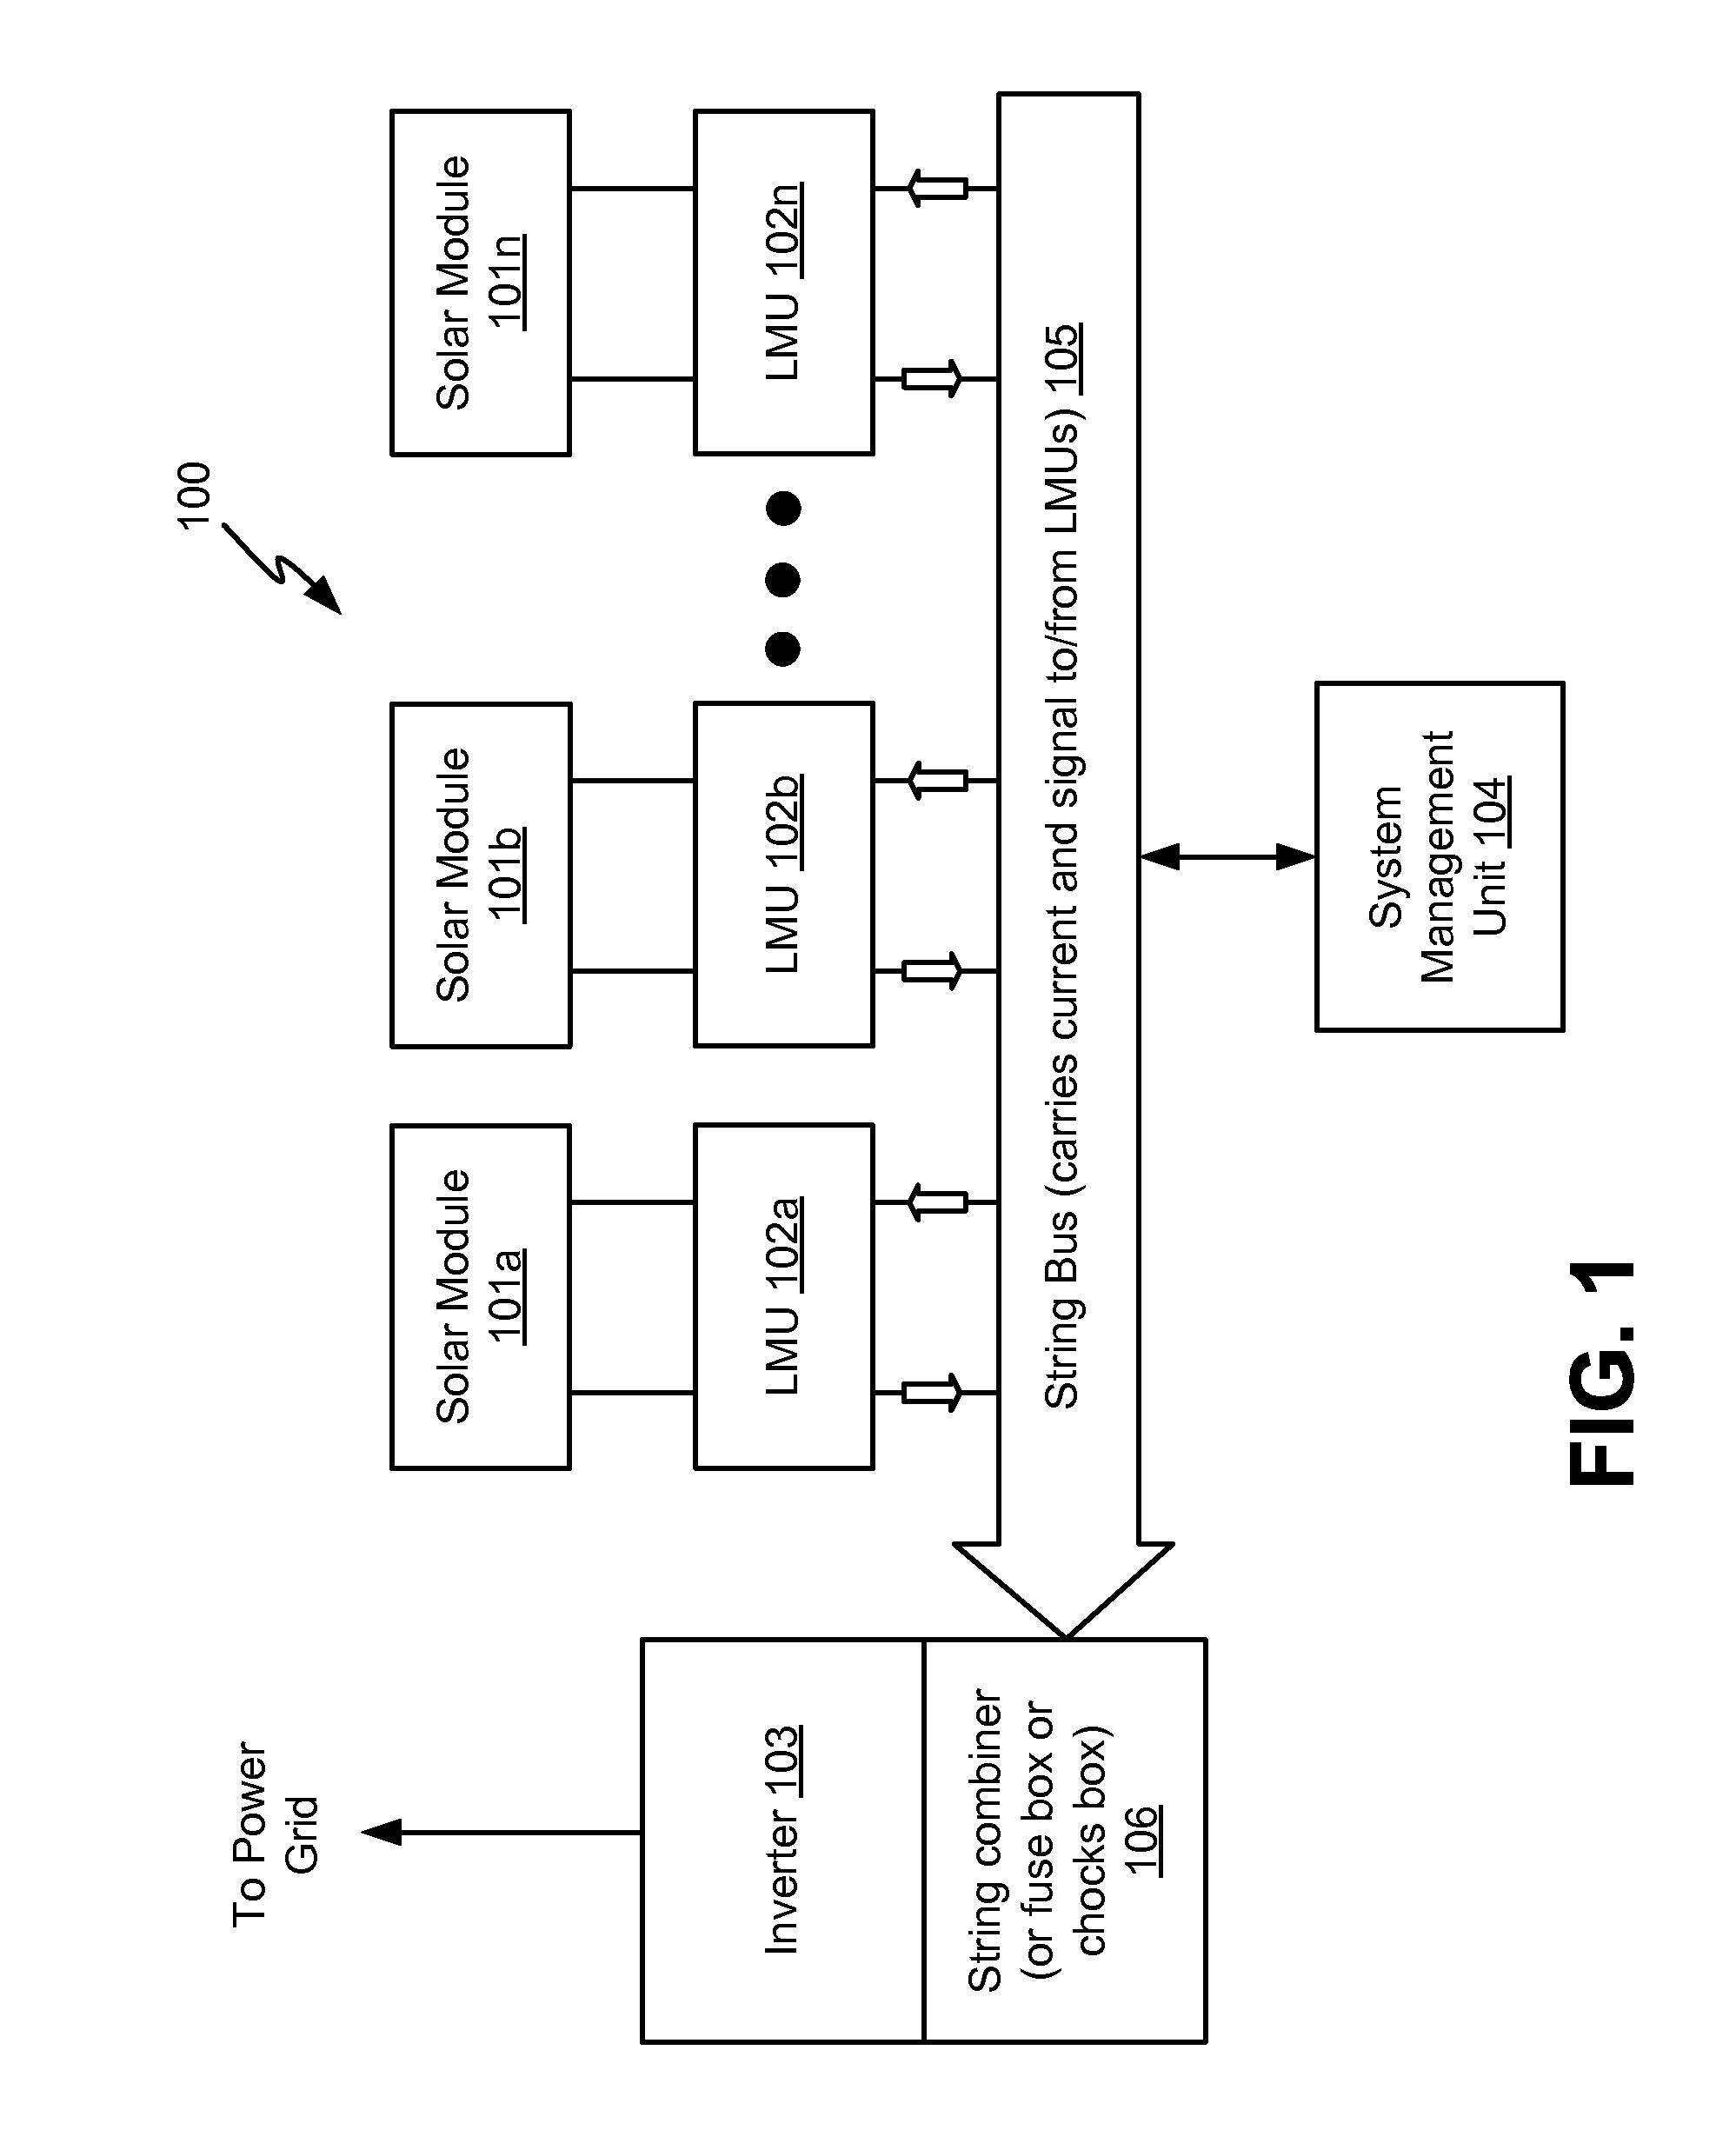 System and Method for Flash Bypass